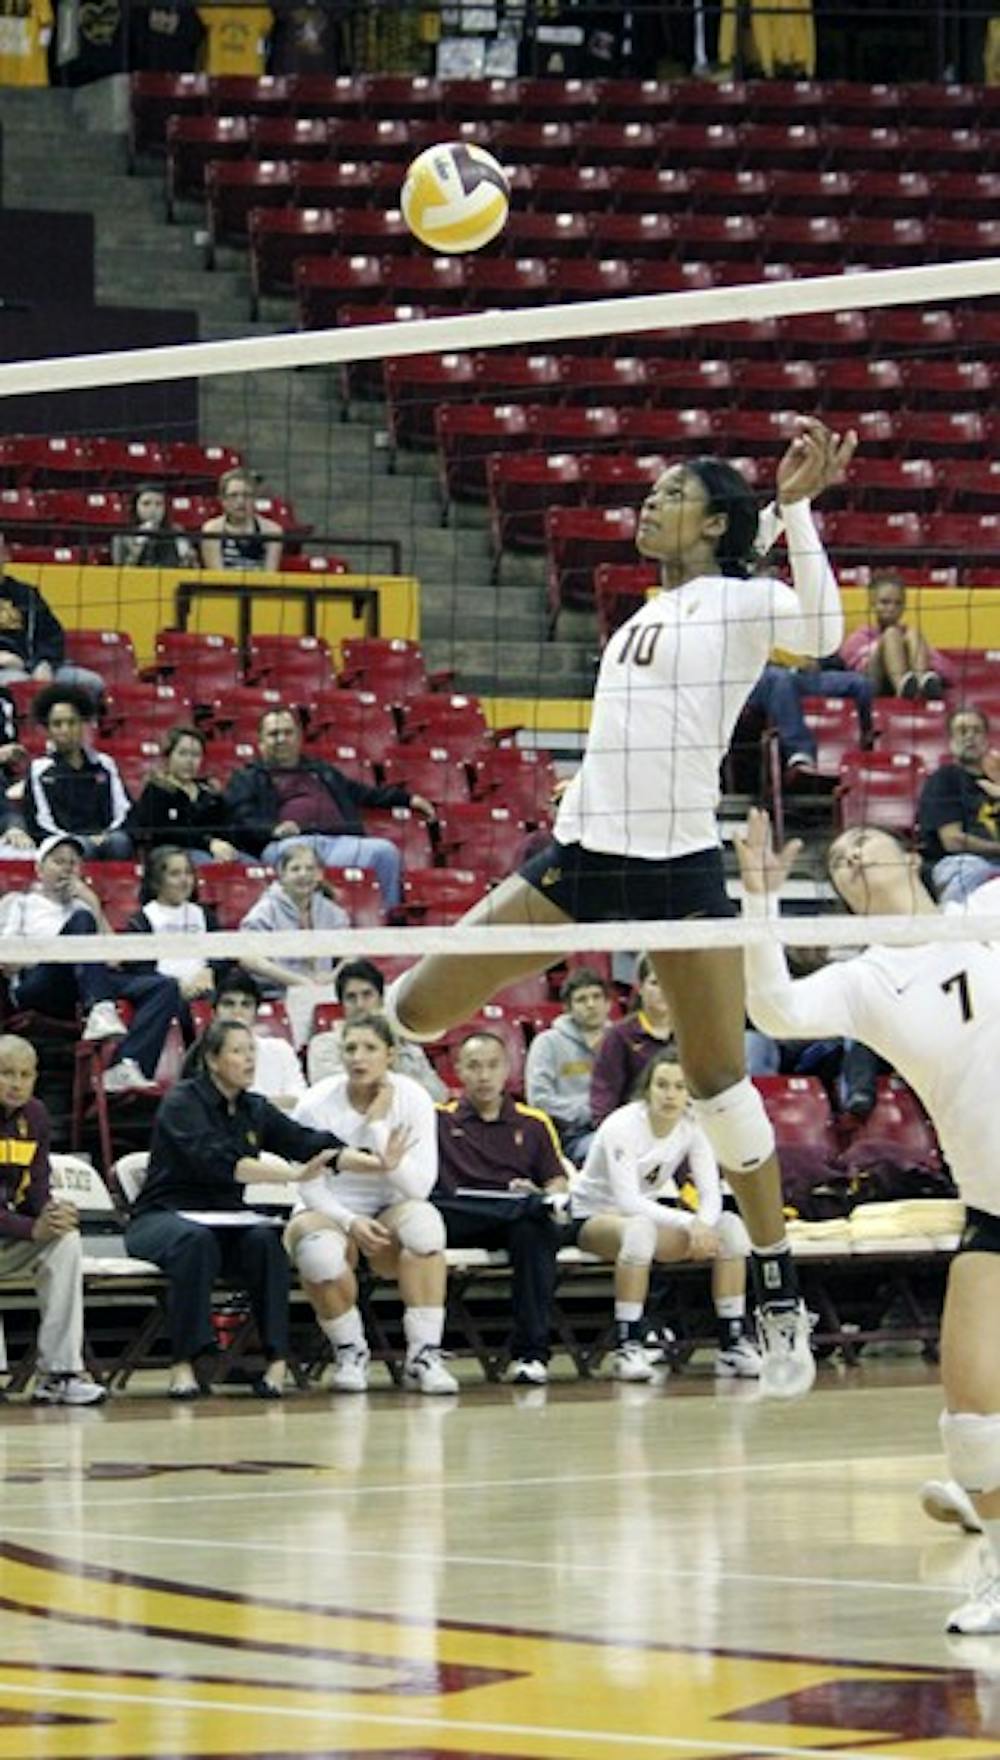 HOME STRETCH: ASU junior middle blocker Danica Mendivil jumps for the spike during the Sun Devils’ win over Oregon State on Saturday. ASU plays Utah and Colorado at home, and are hoping to come away with a pair of wins. (Photo by Samuel Rosenbaum)